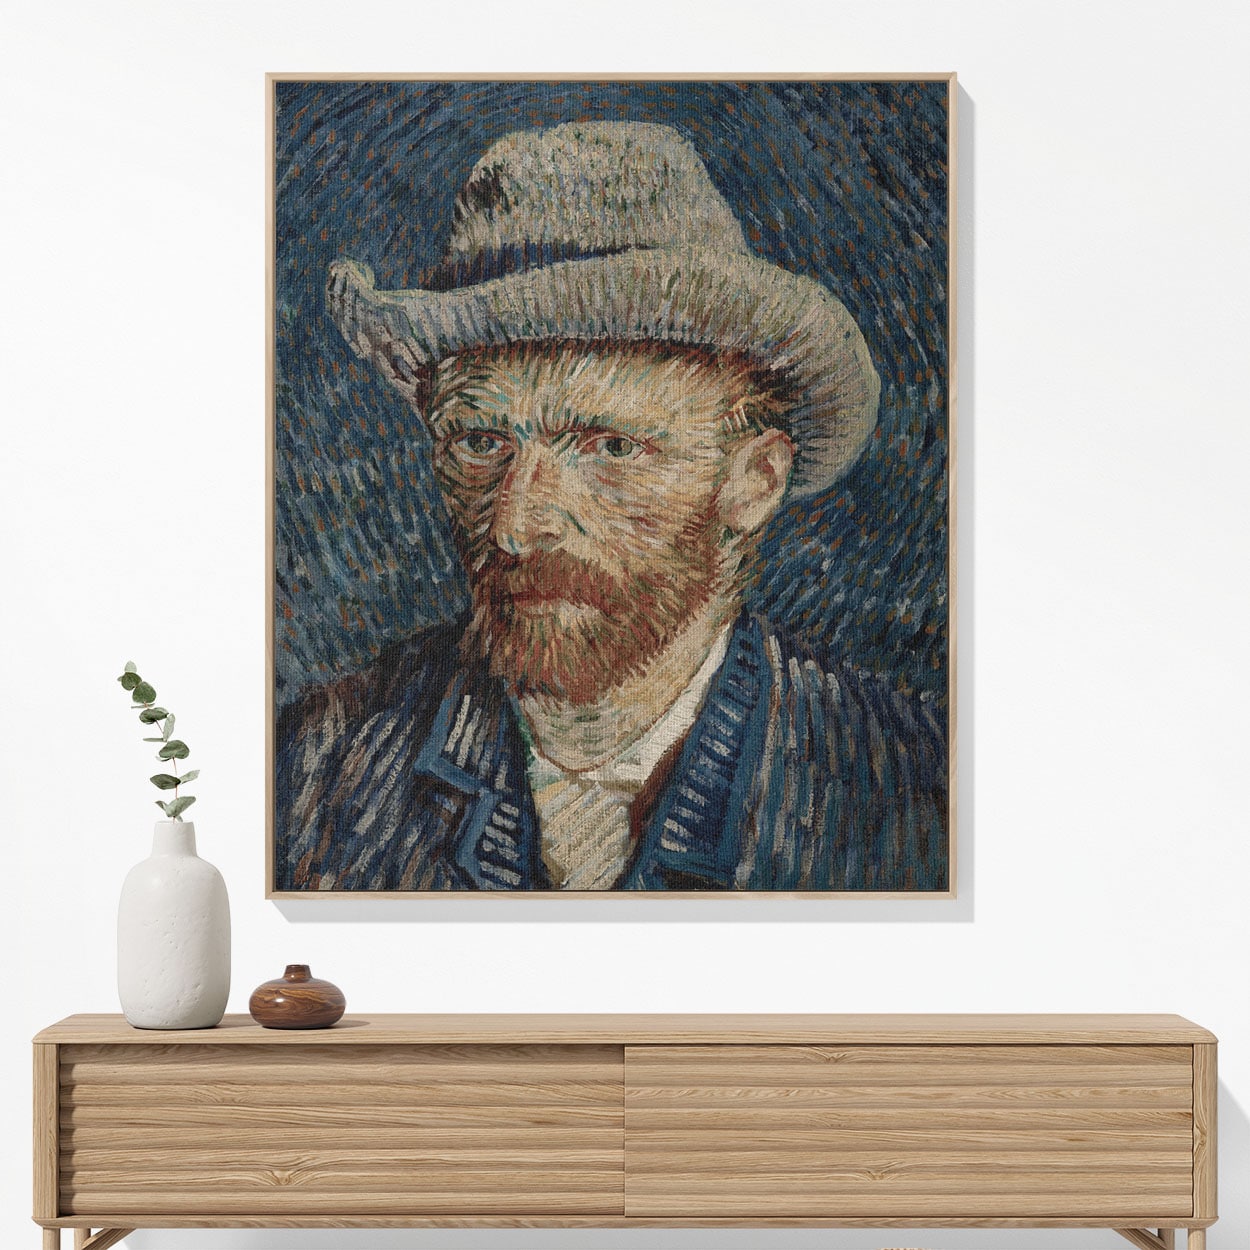 Cool van Gogh Woven Blanket Woven Blanket Hanging on a Wall as Framed Wall Art